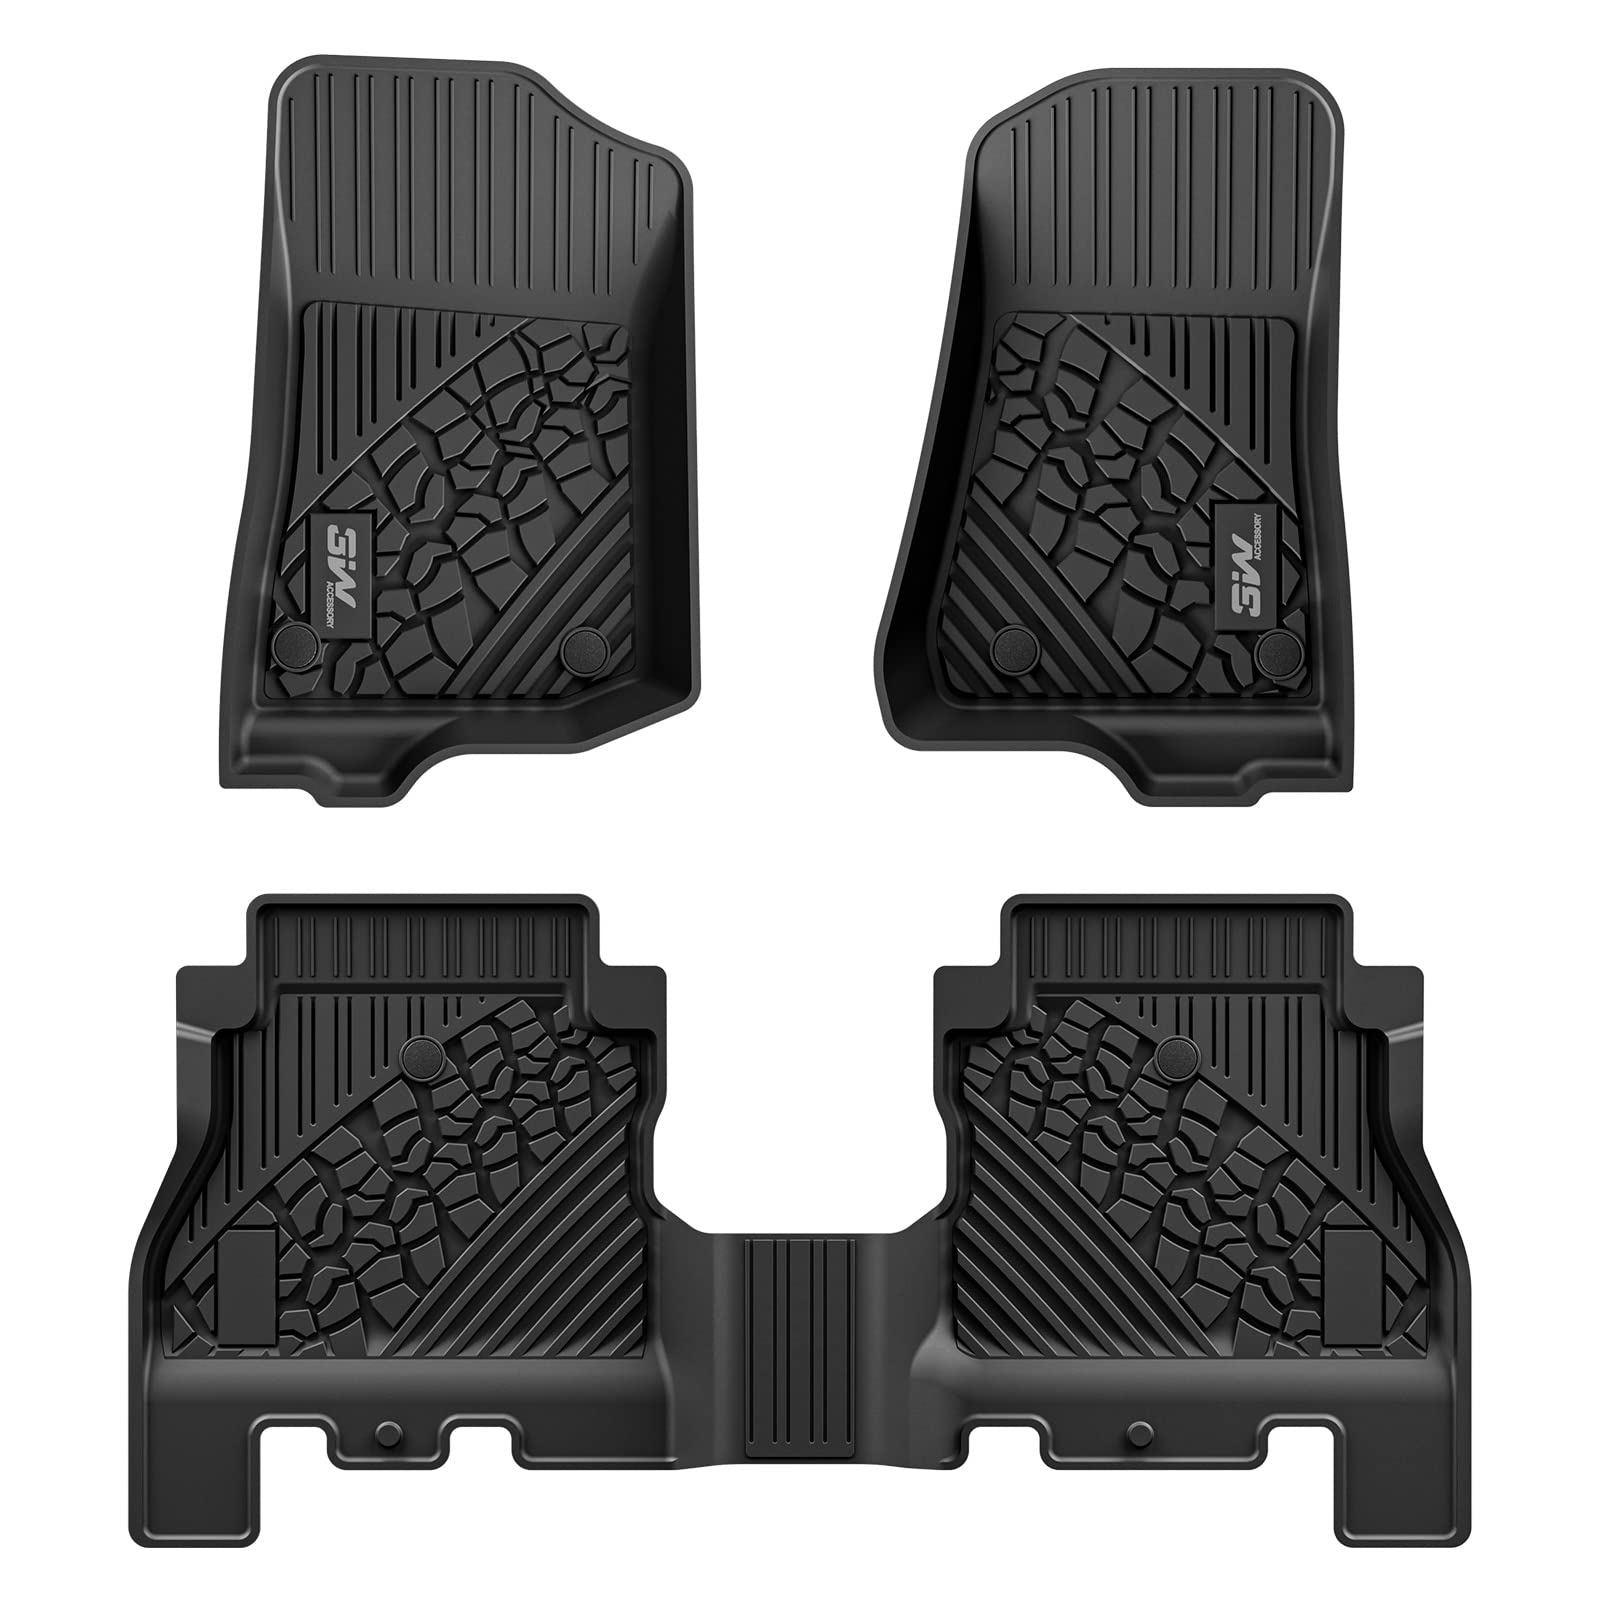 3W Jeep Wrangler JL (Non JK or 4XE) 2018-2023 Custom Floor Mats / Trunk Mat TPE Material & All-Weather Protection Vehicles & Parts 3w 2018-2023 Wrangler JL 2018-2023 with Subwoofer 1st&2nd Row Mats with White Logo